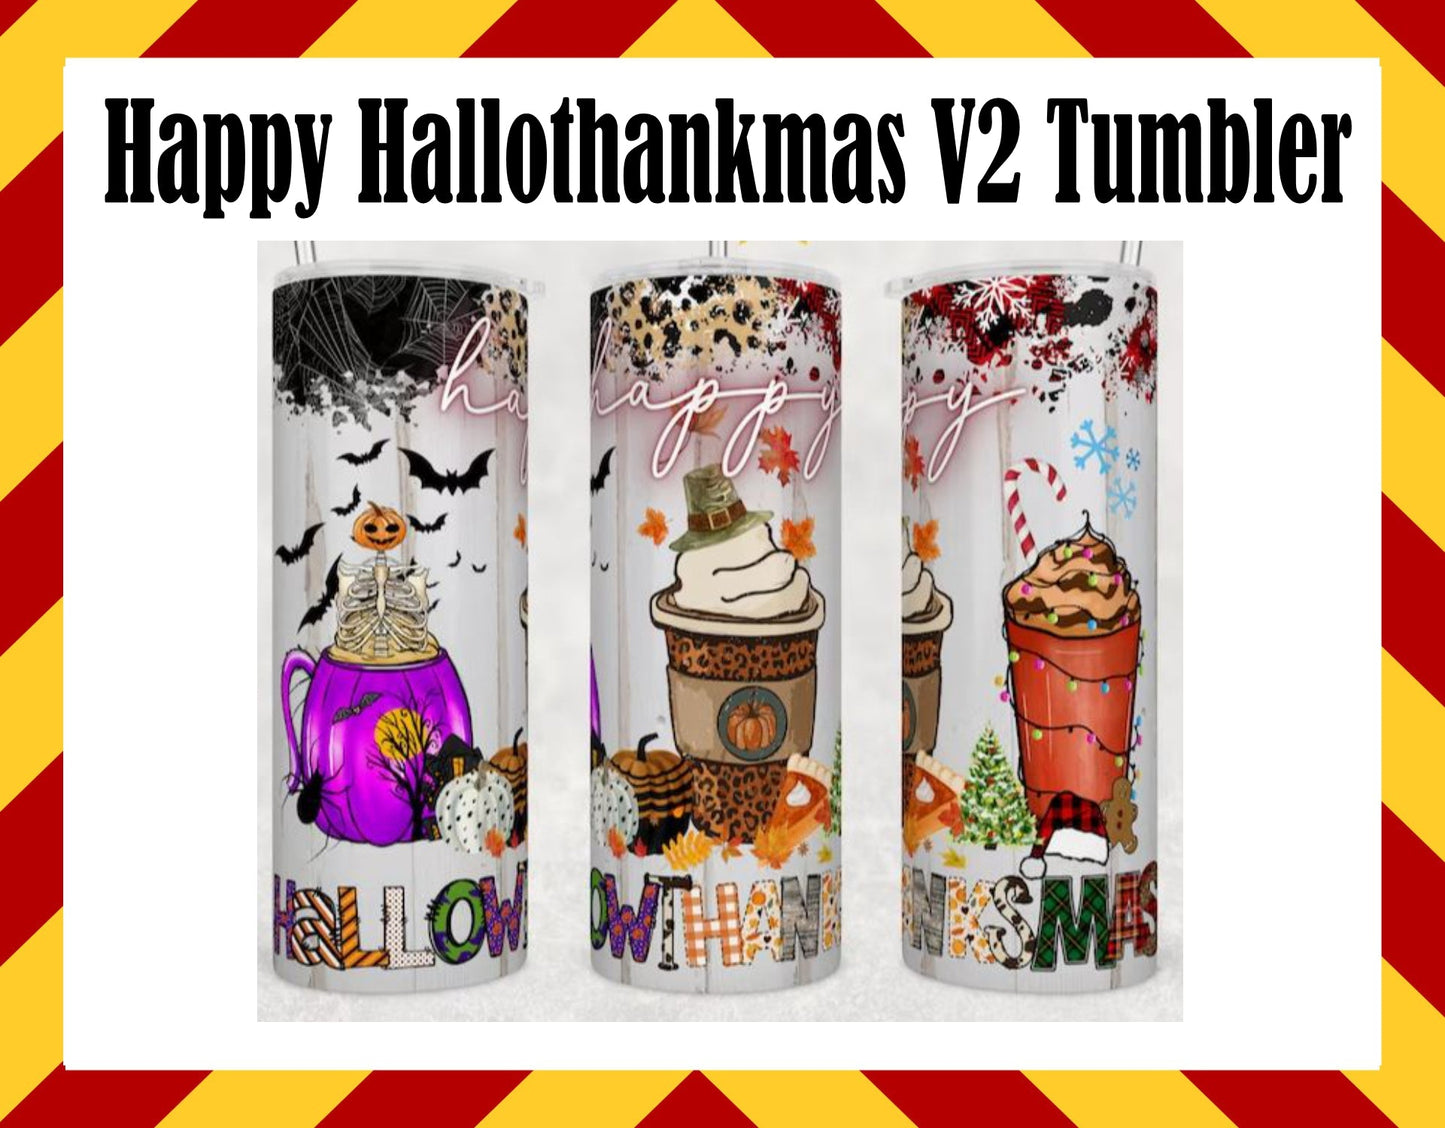 Stainless Steel Cup - Hallothankmas Version 2 Design Hot/Cold Cup